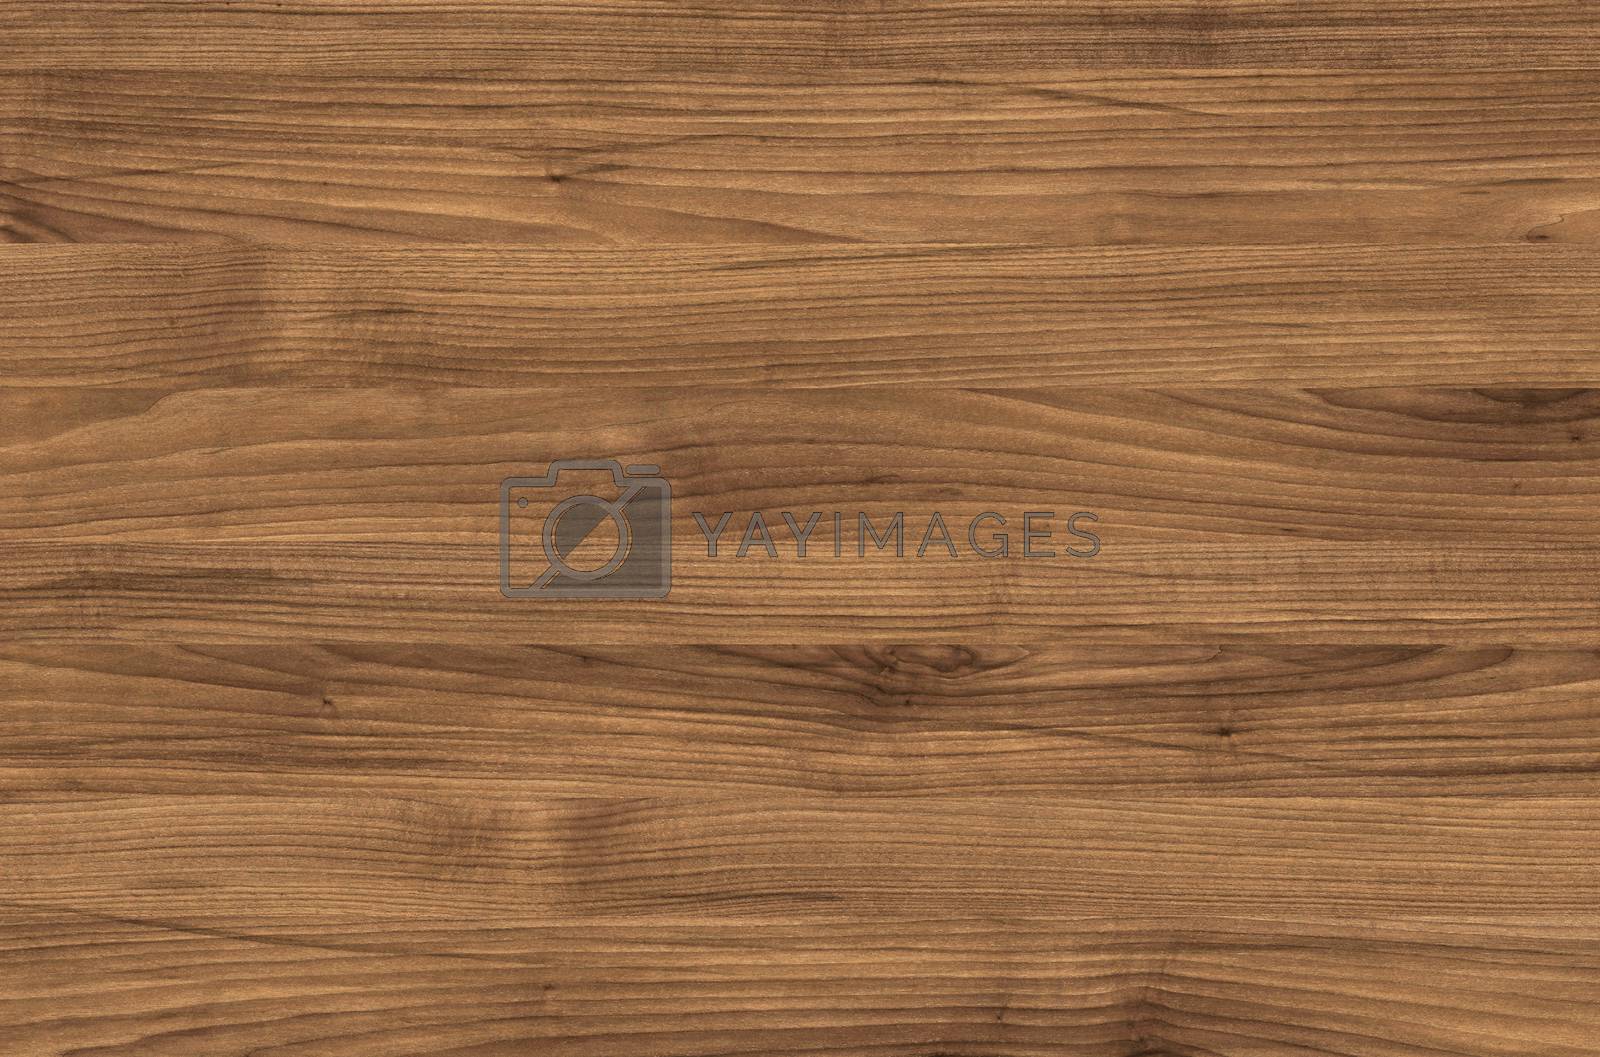 Royalty free image of grunge wood pattern texture by ivo_13